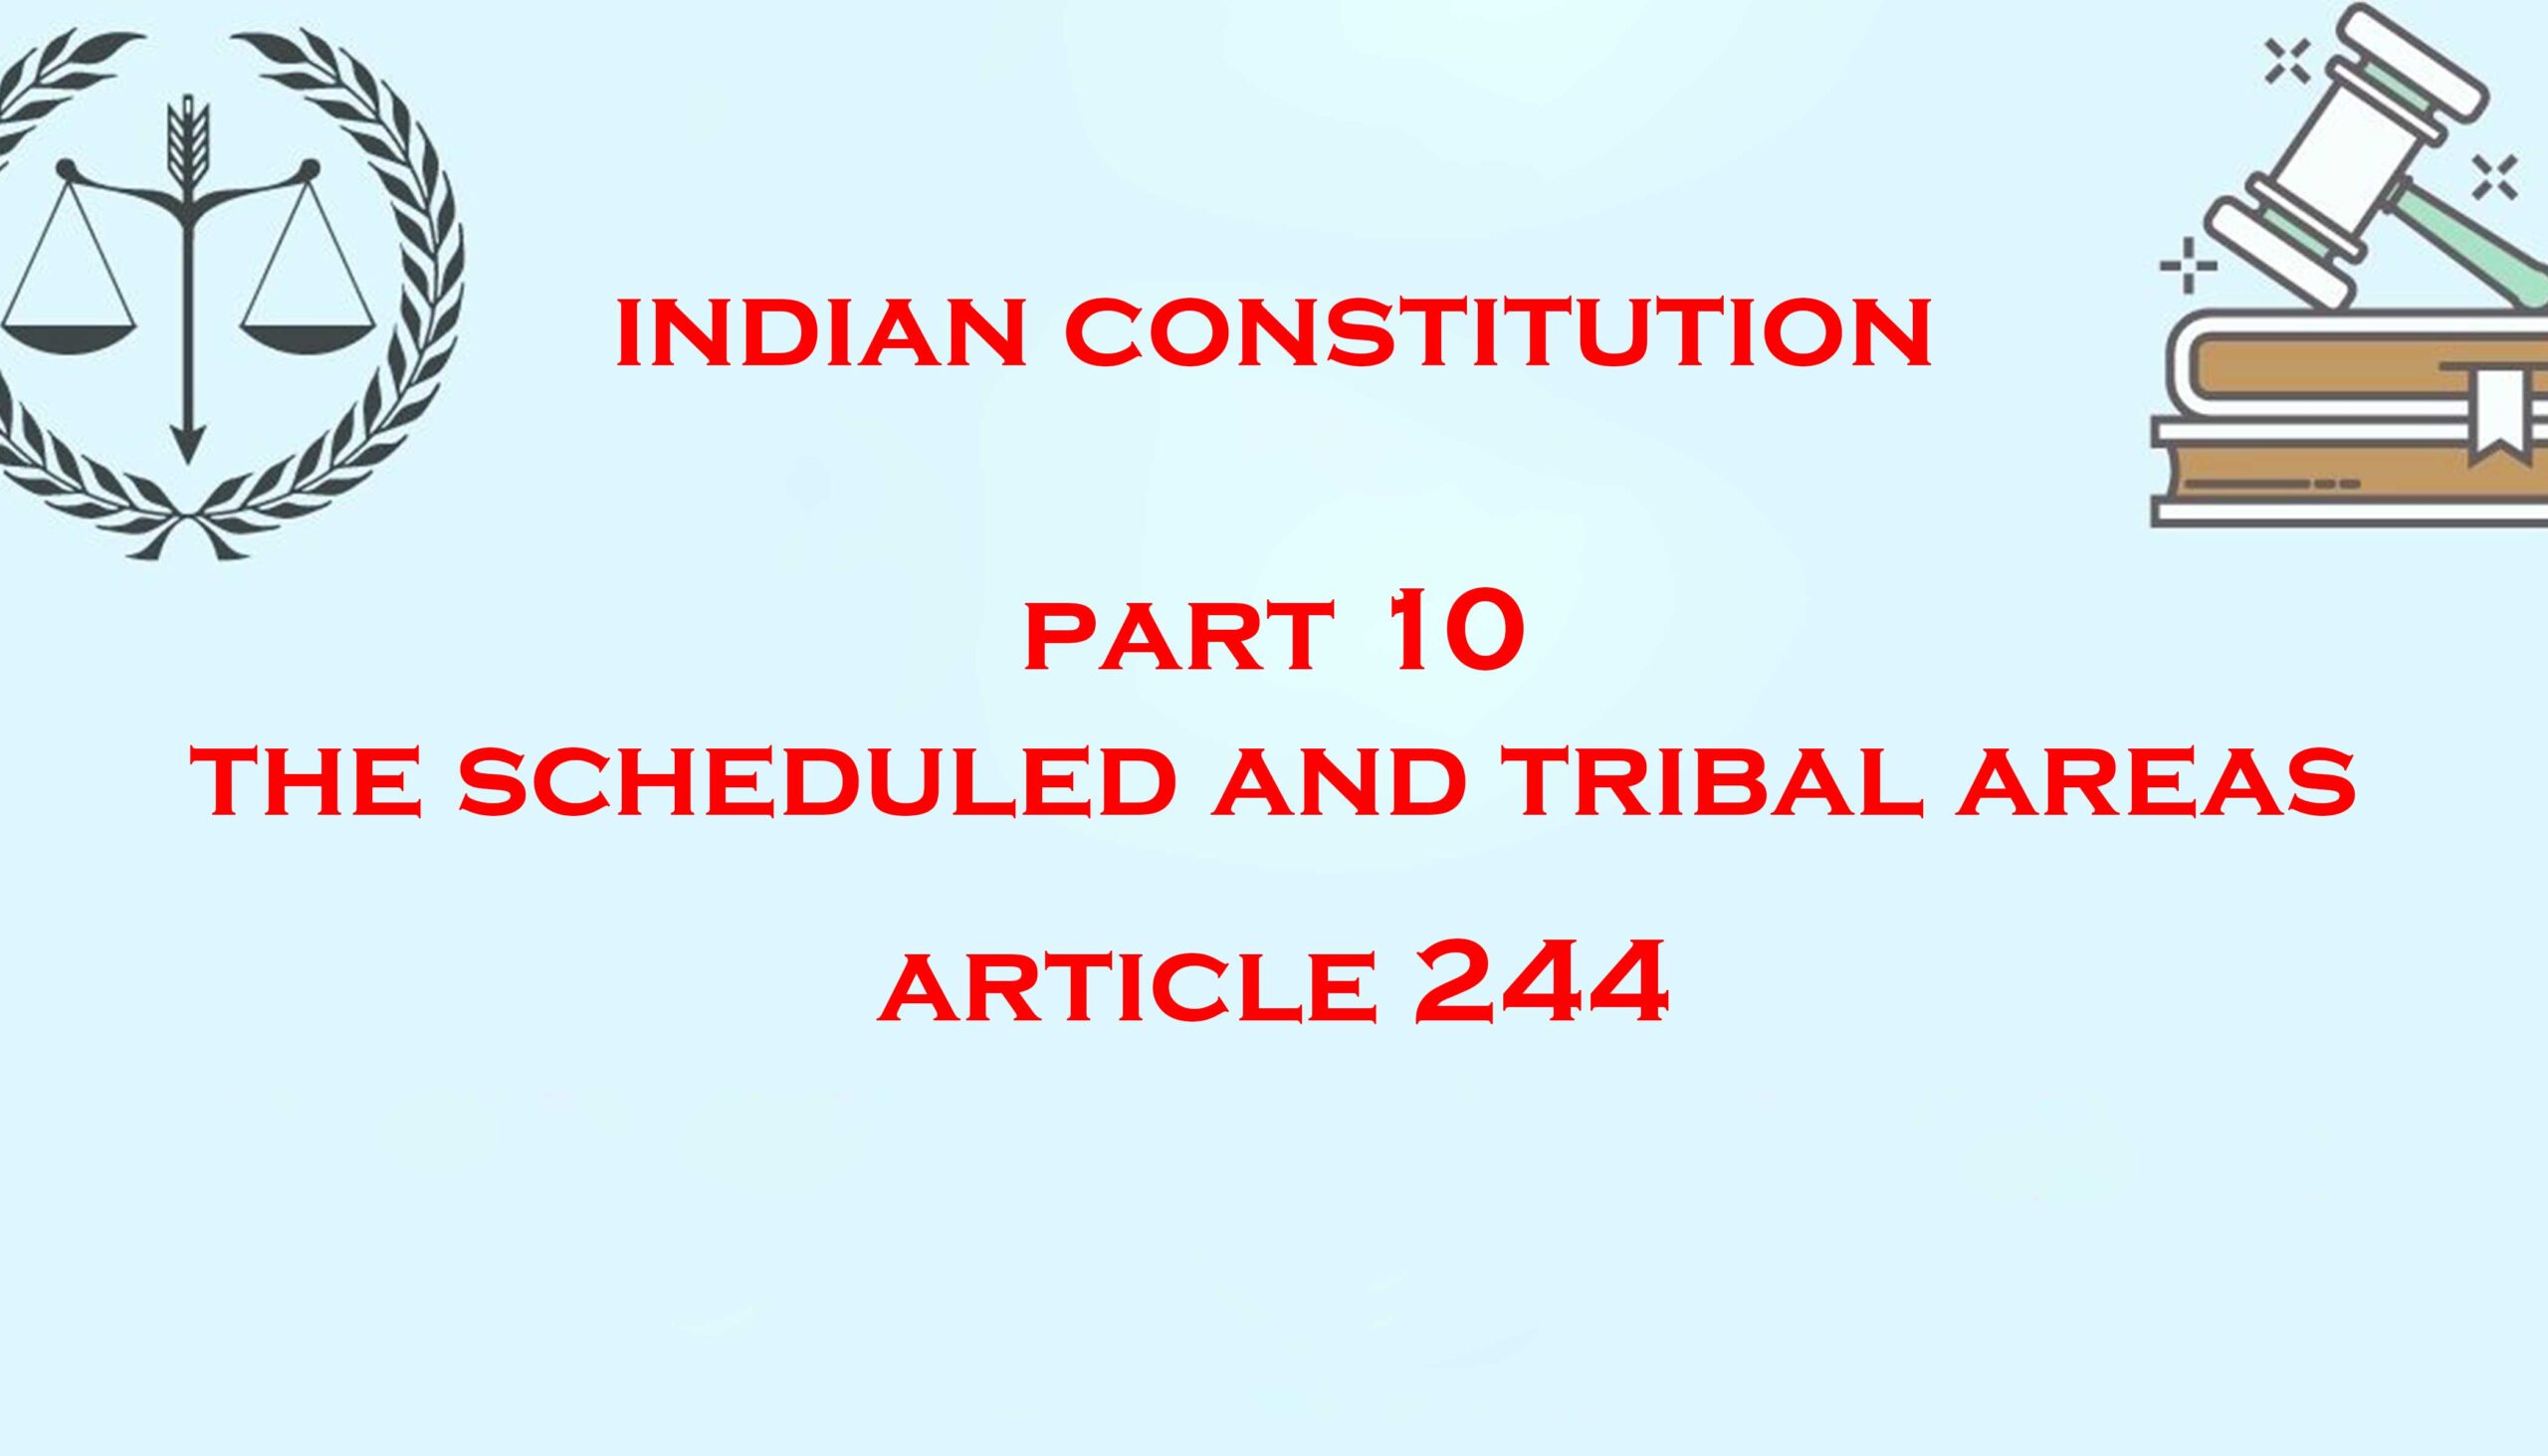 Article 244 – Administration of Scheduled Areas and Tribal Areas